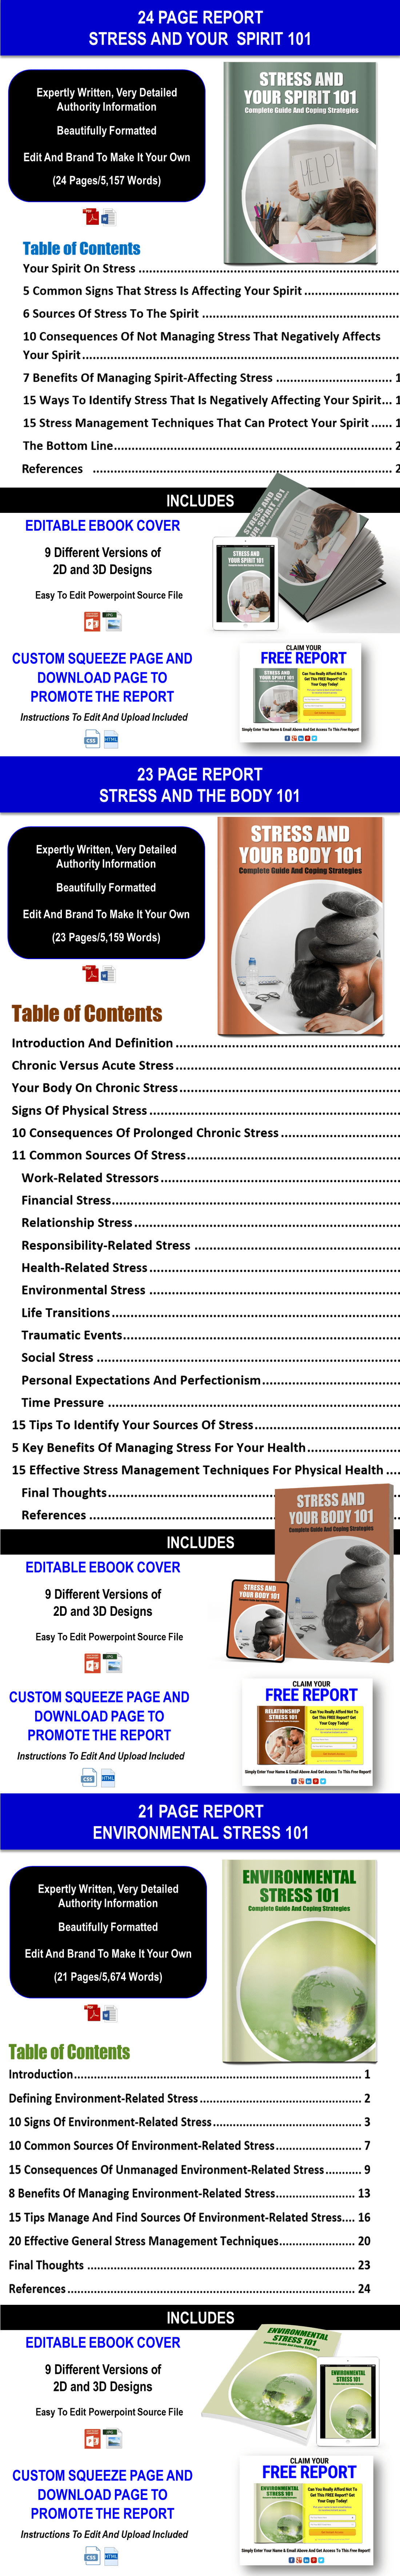 Whole Person Stress Management Blueprint: Managing Stress In All Areas Of Life And Self Giant Content Pack PLR Rights